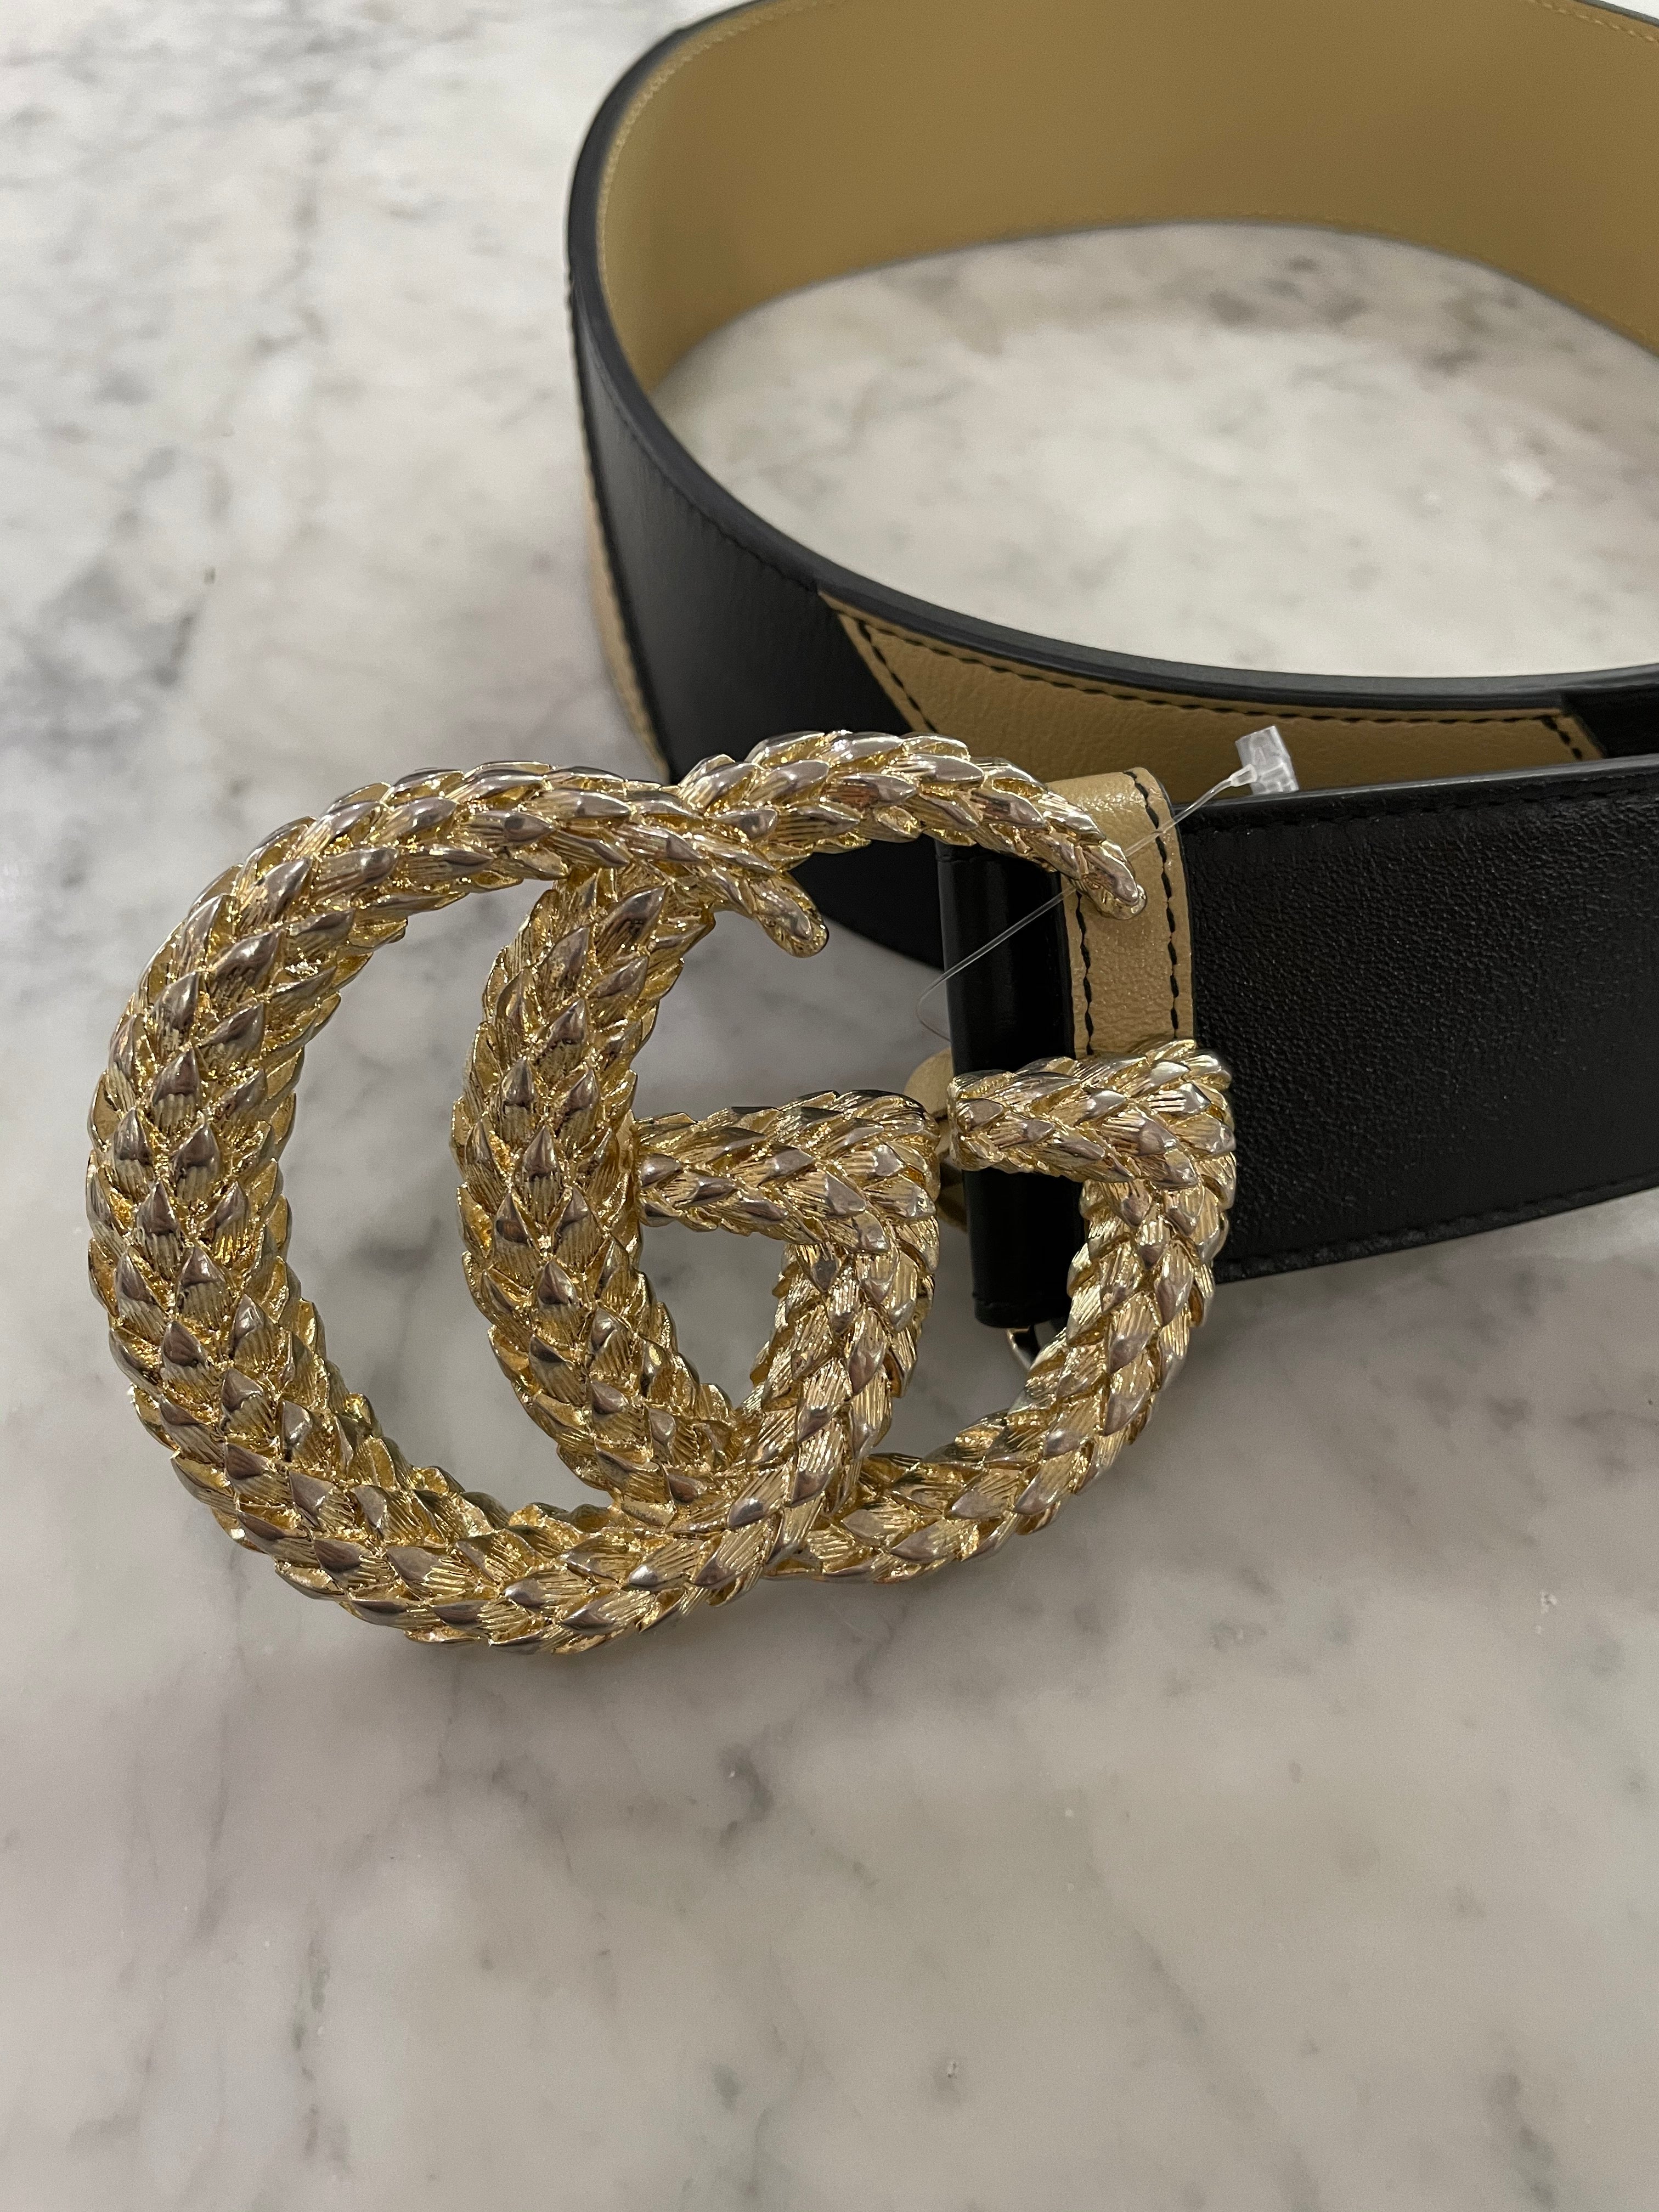 GUCCI DOUBLE G BELT BUCKLE REVIEW